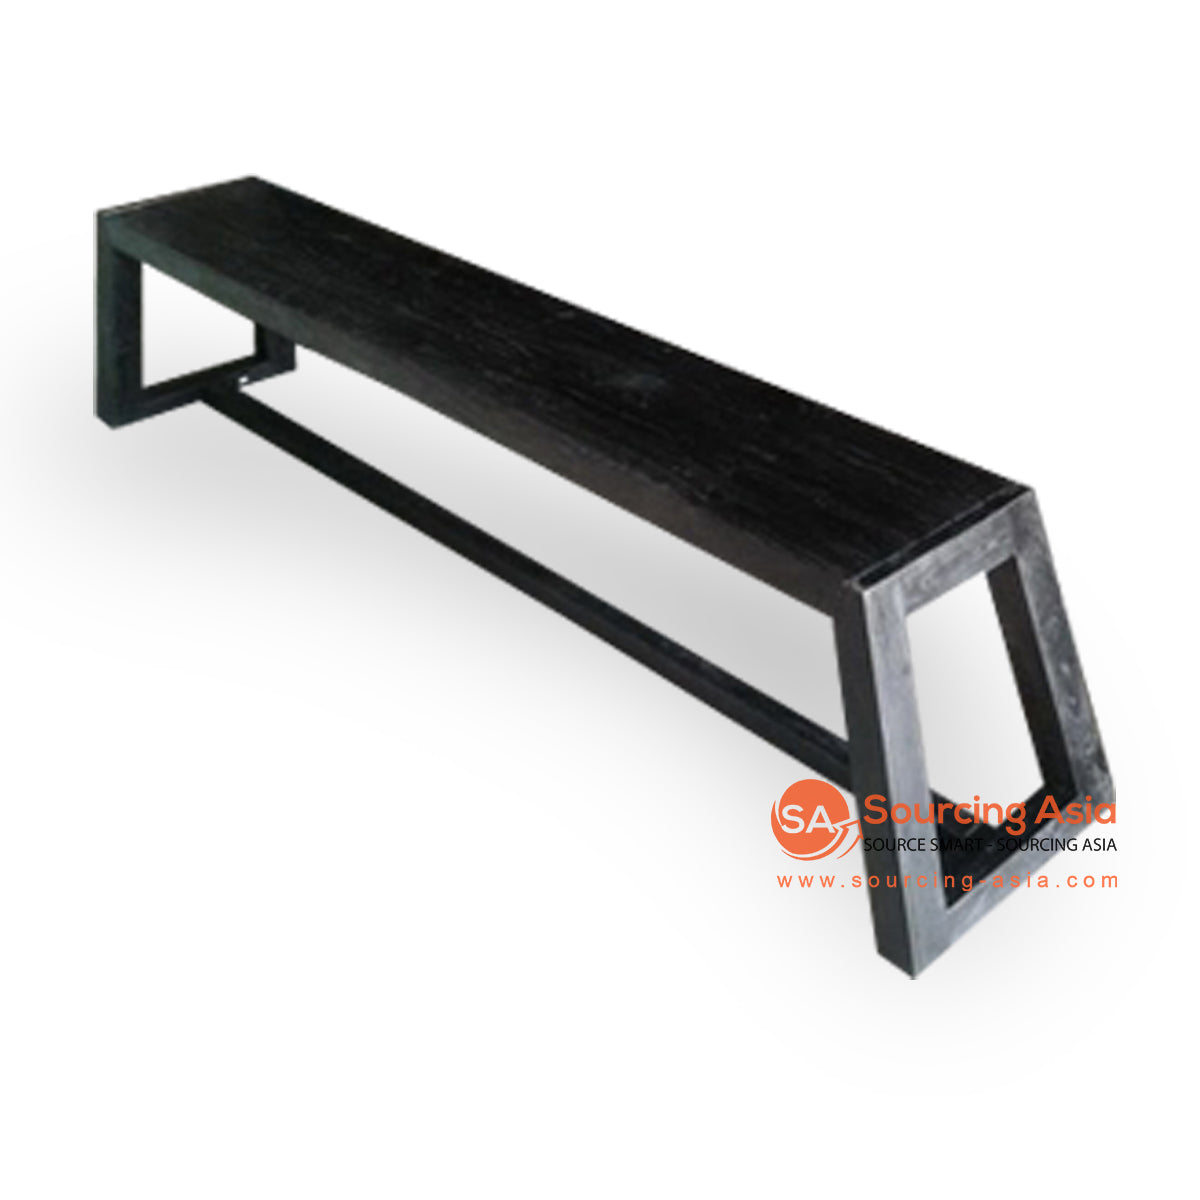 Ecl061 Black Recycled Teak Wood Bench Sourcing Asia